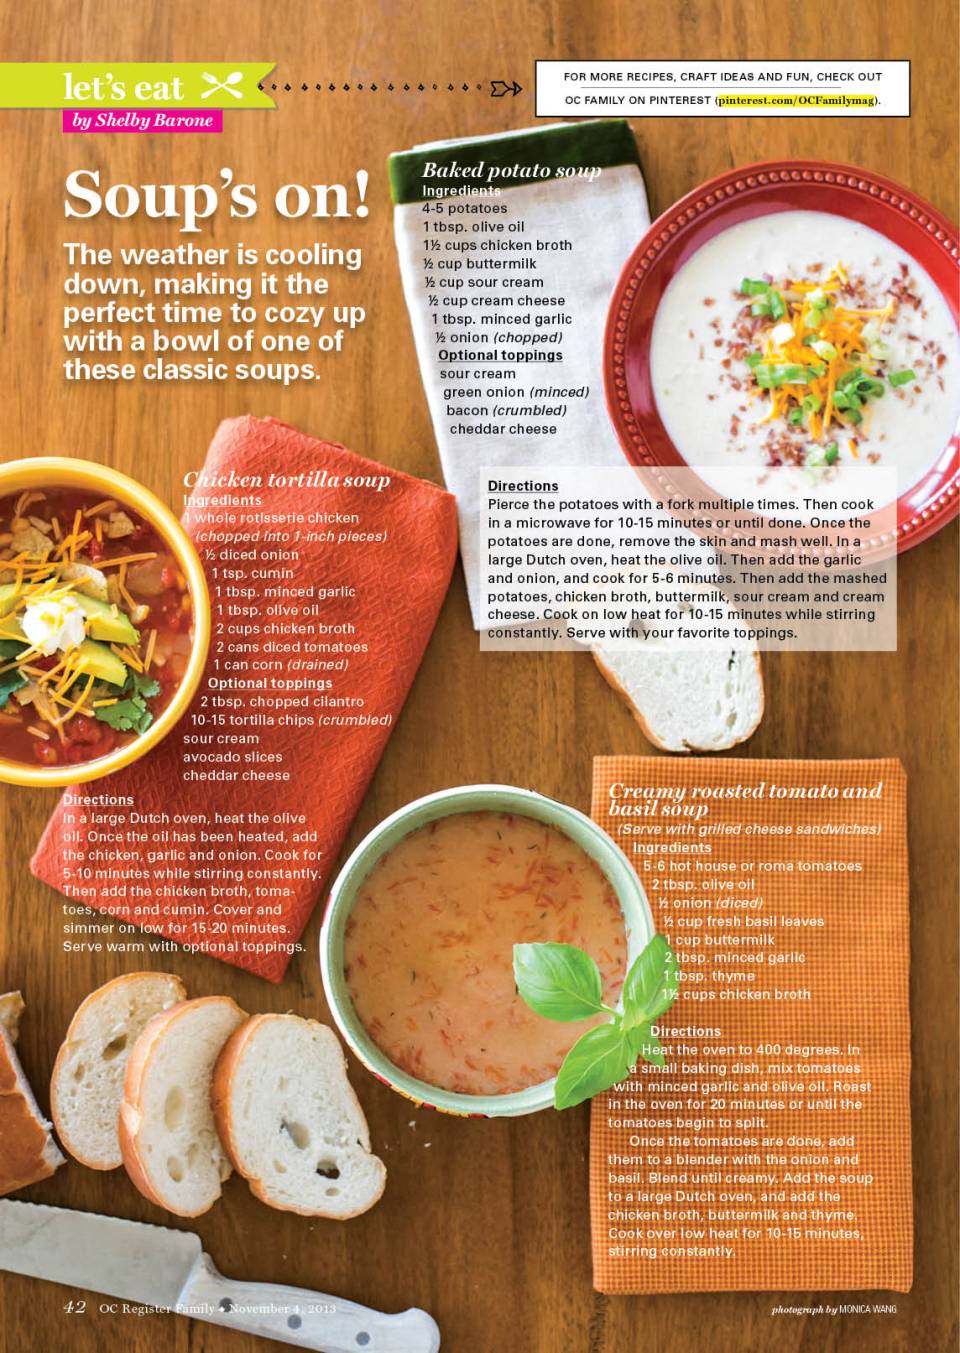 Image of a magazine layout with text wrapped around circular shaped images.